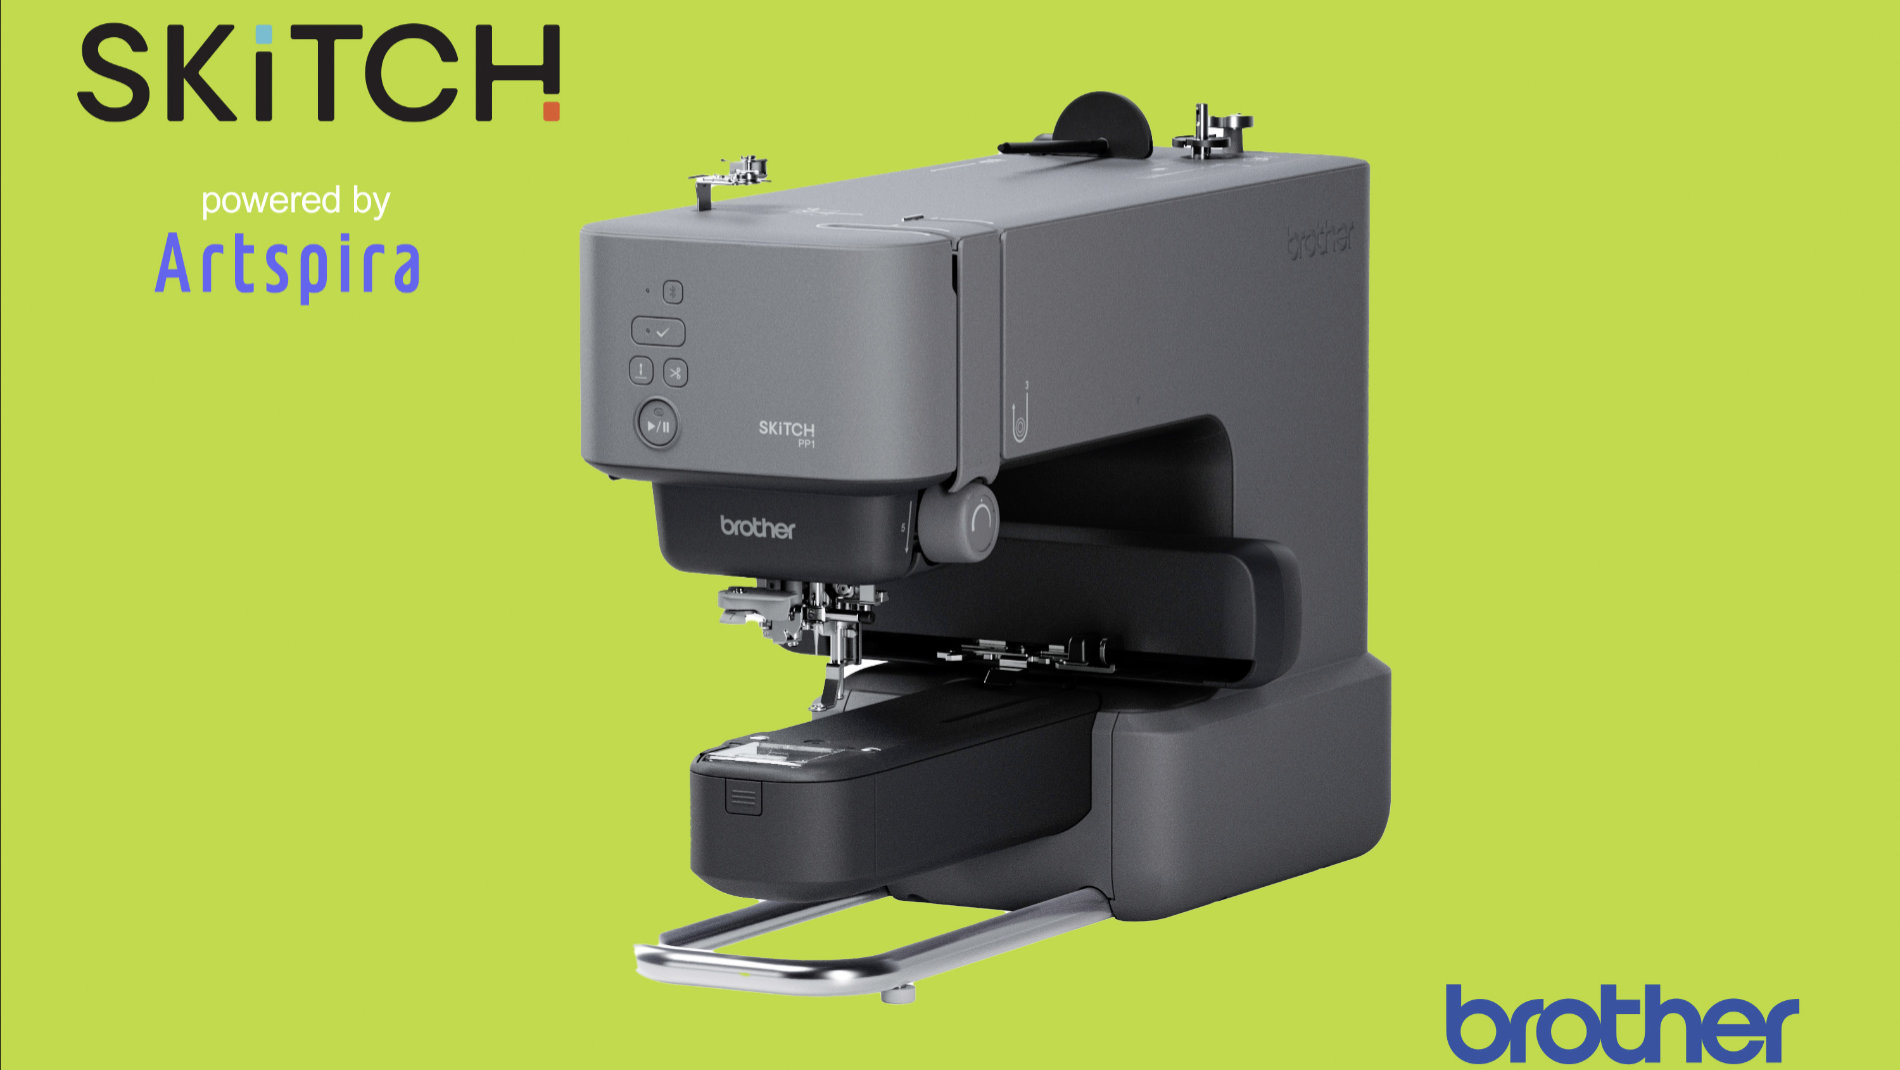 Brother Sewing Machines Europe GmbH – Brother Skitch